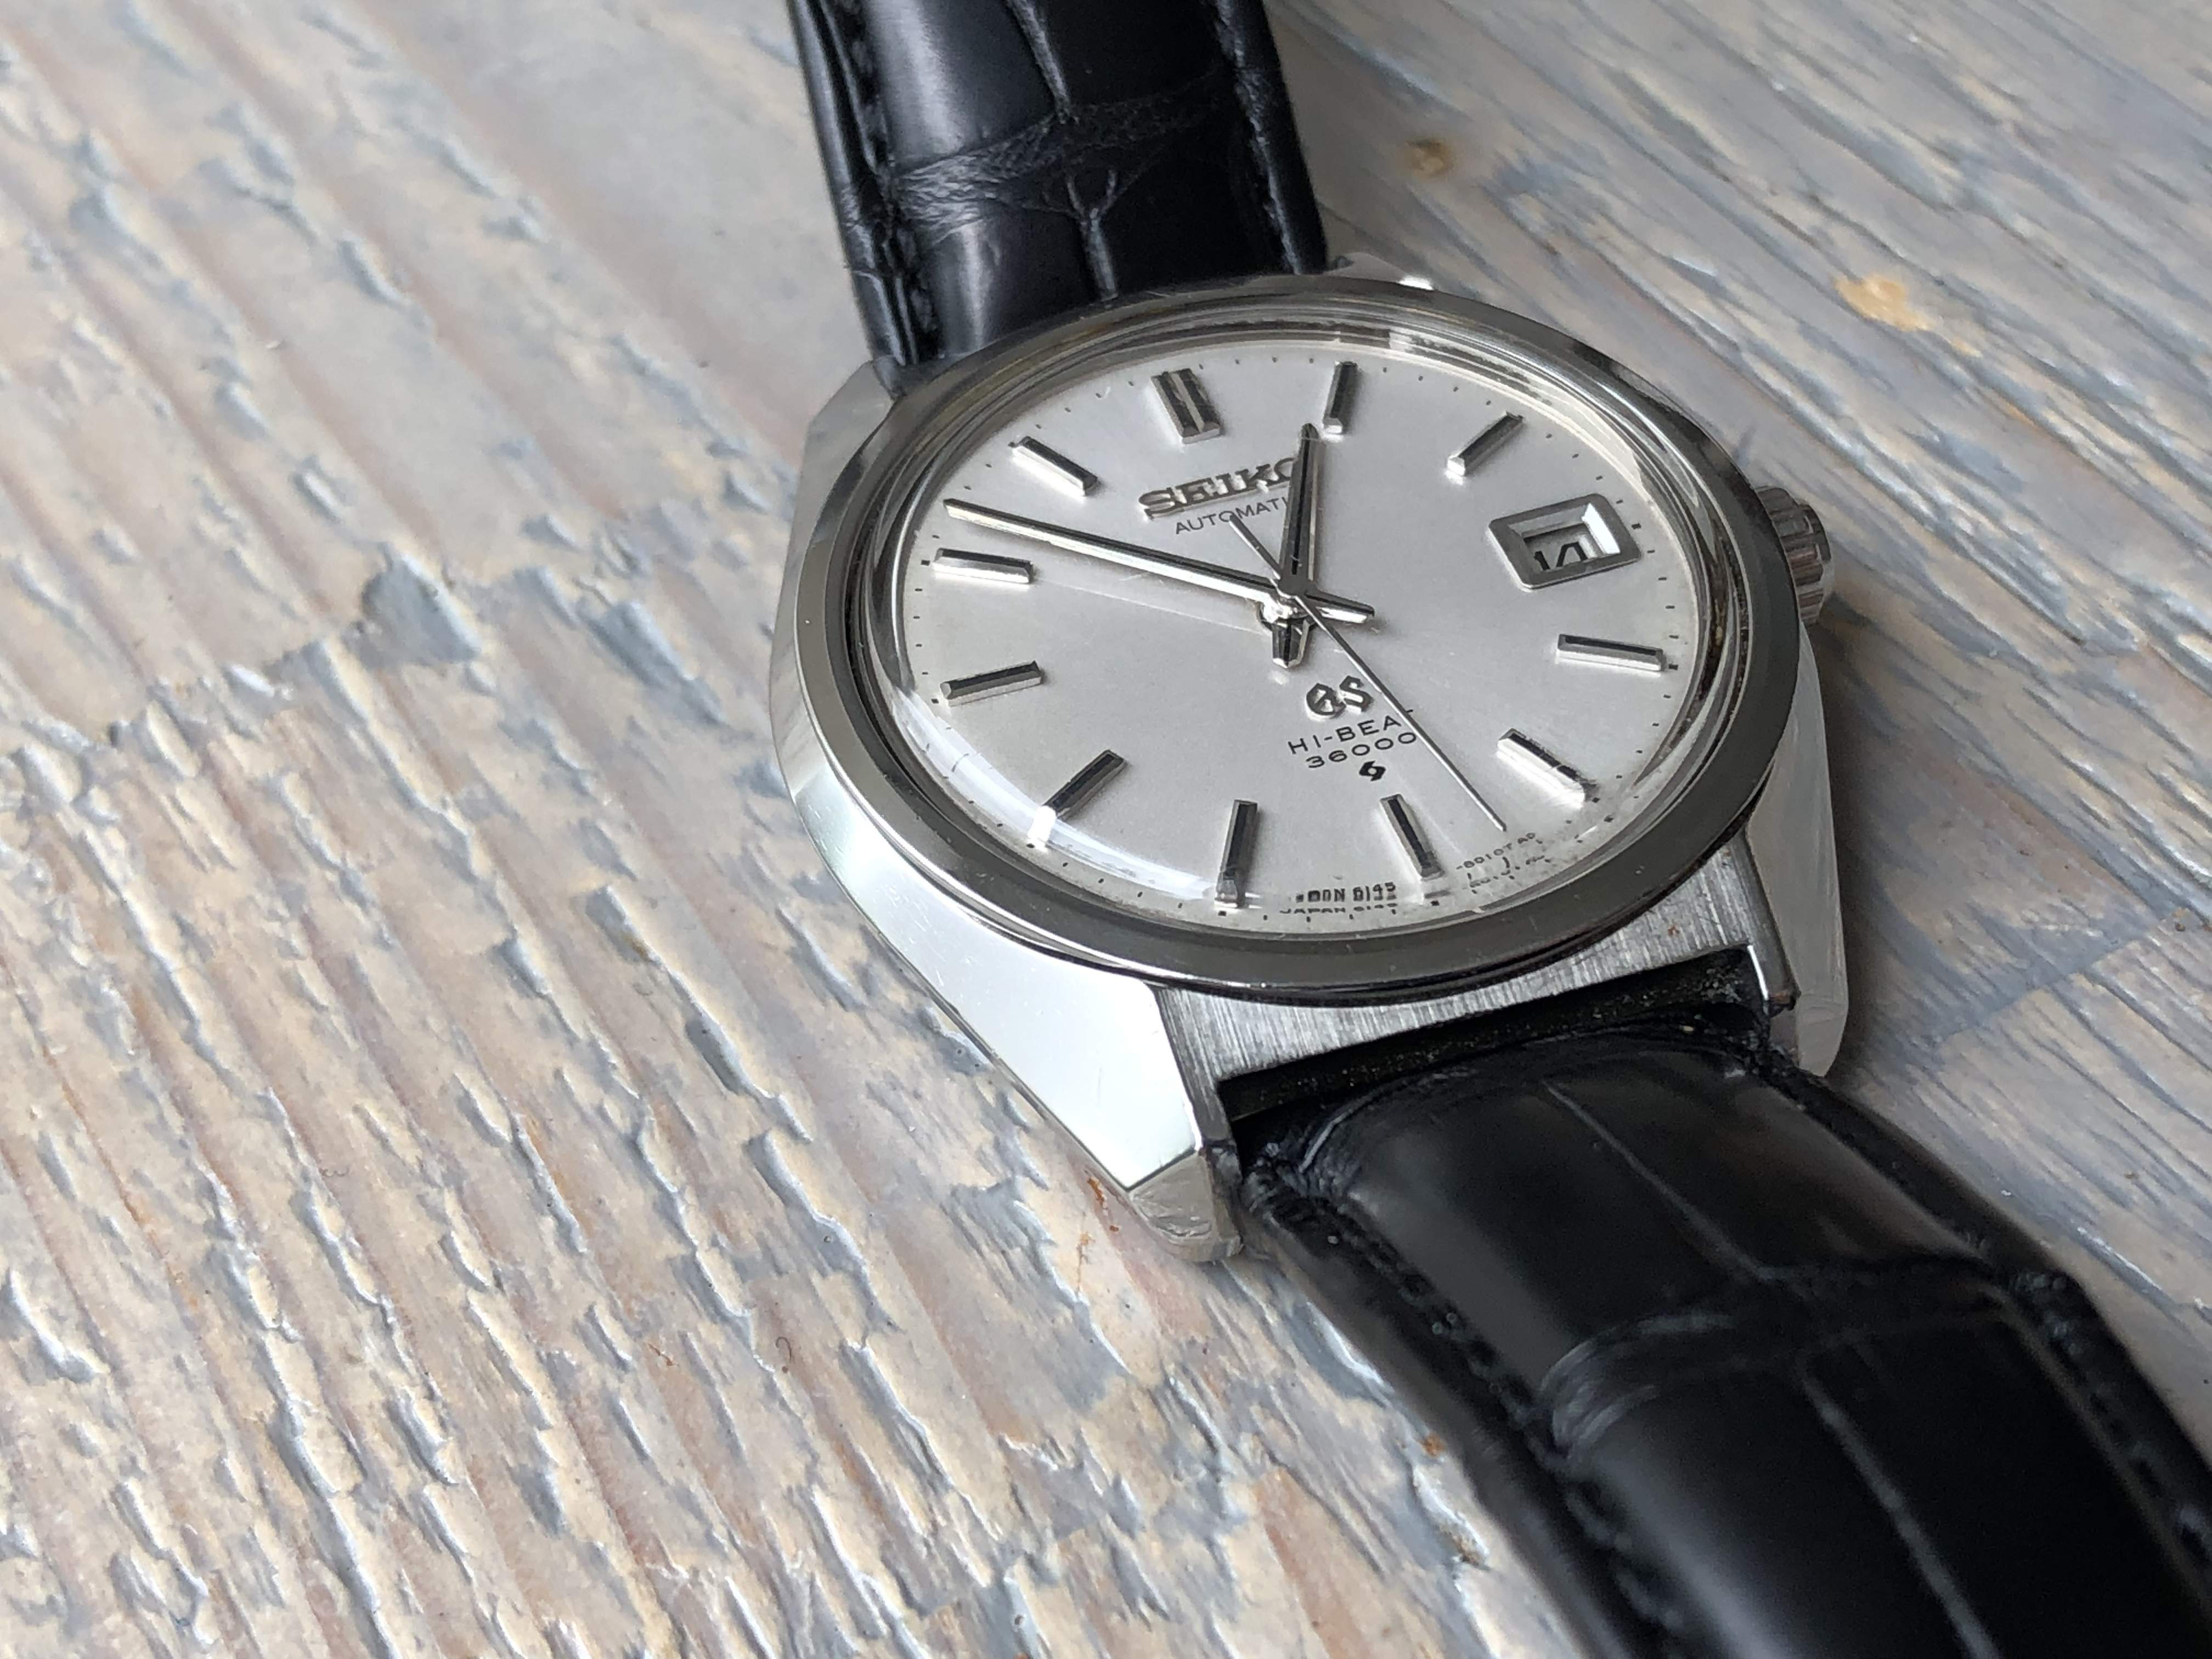 Grand Seiko 6145-8000 serviced with new mainspring (Sold)